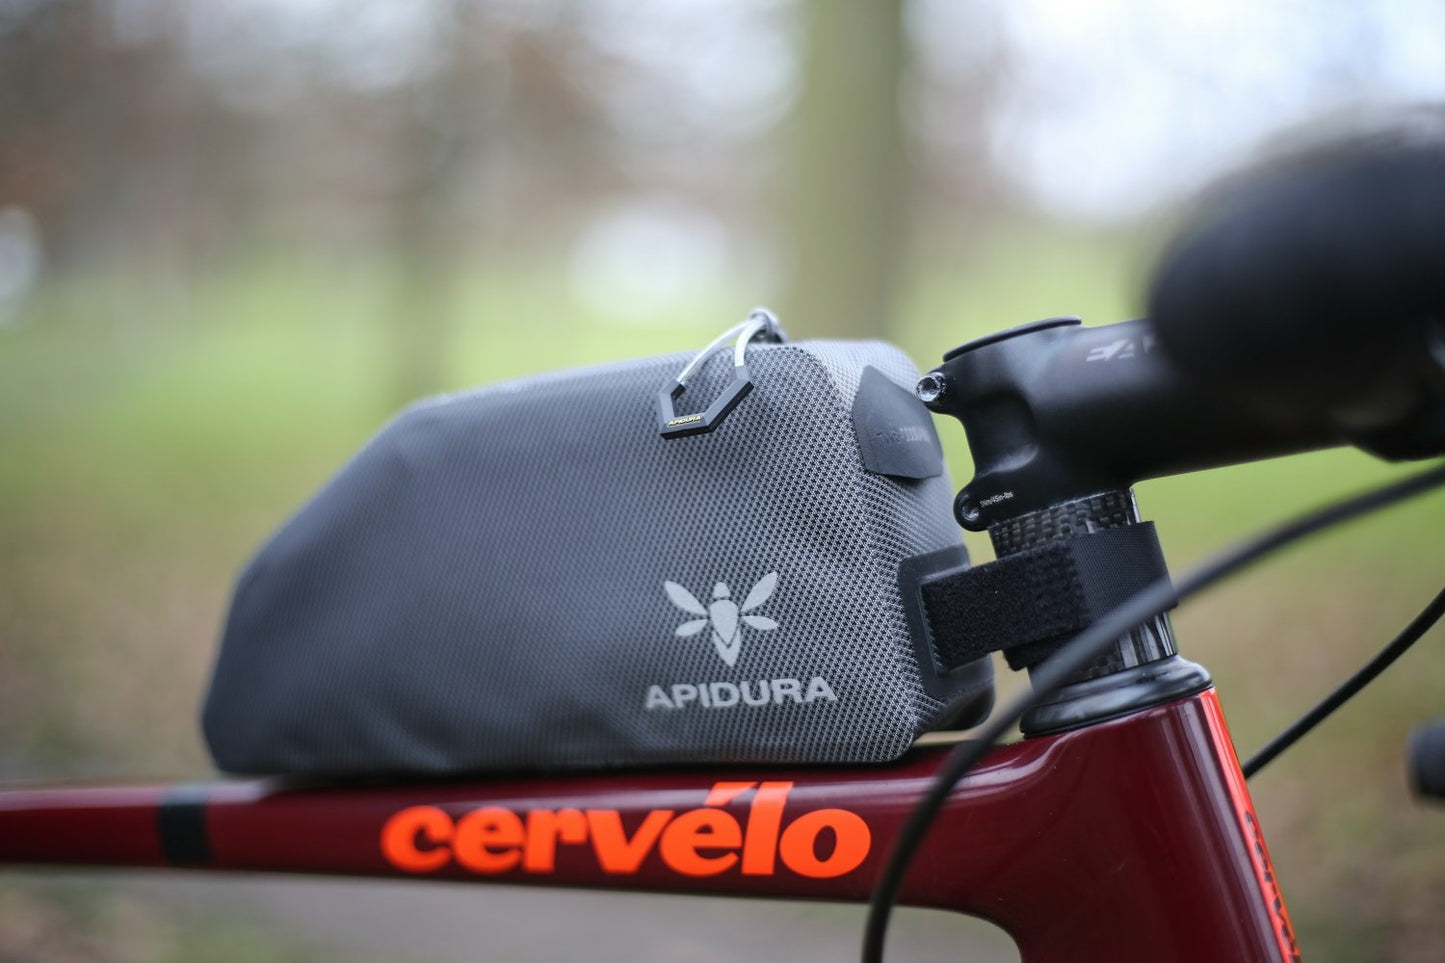 Apidura expedition bolt-on top tube pack